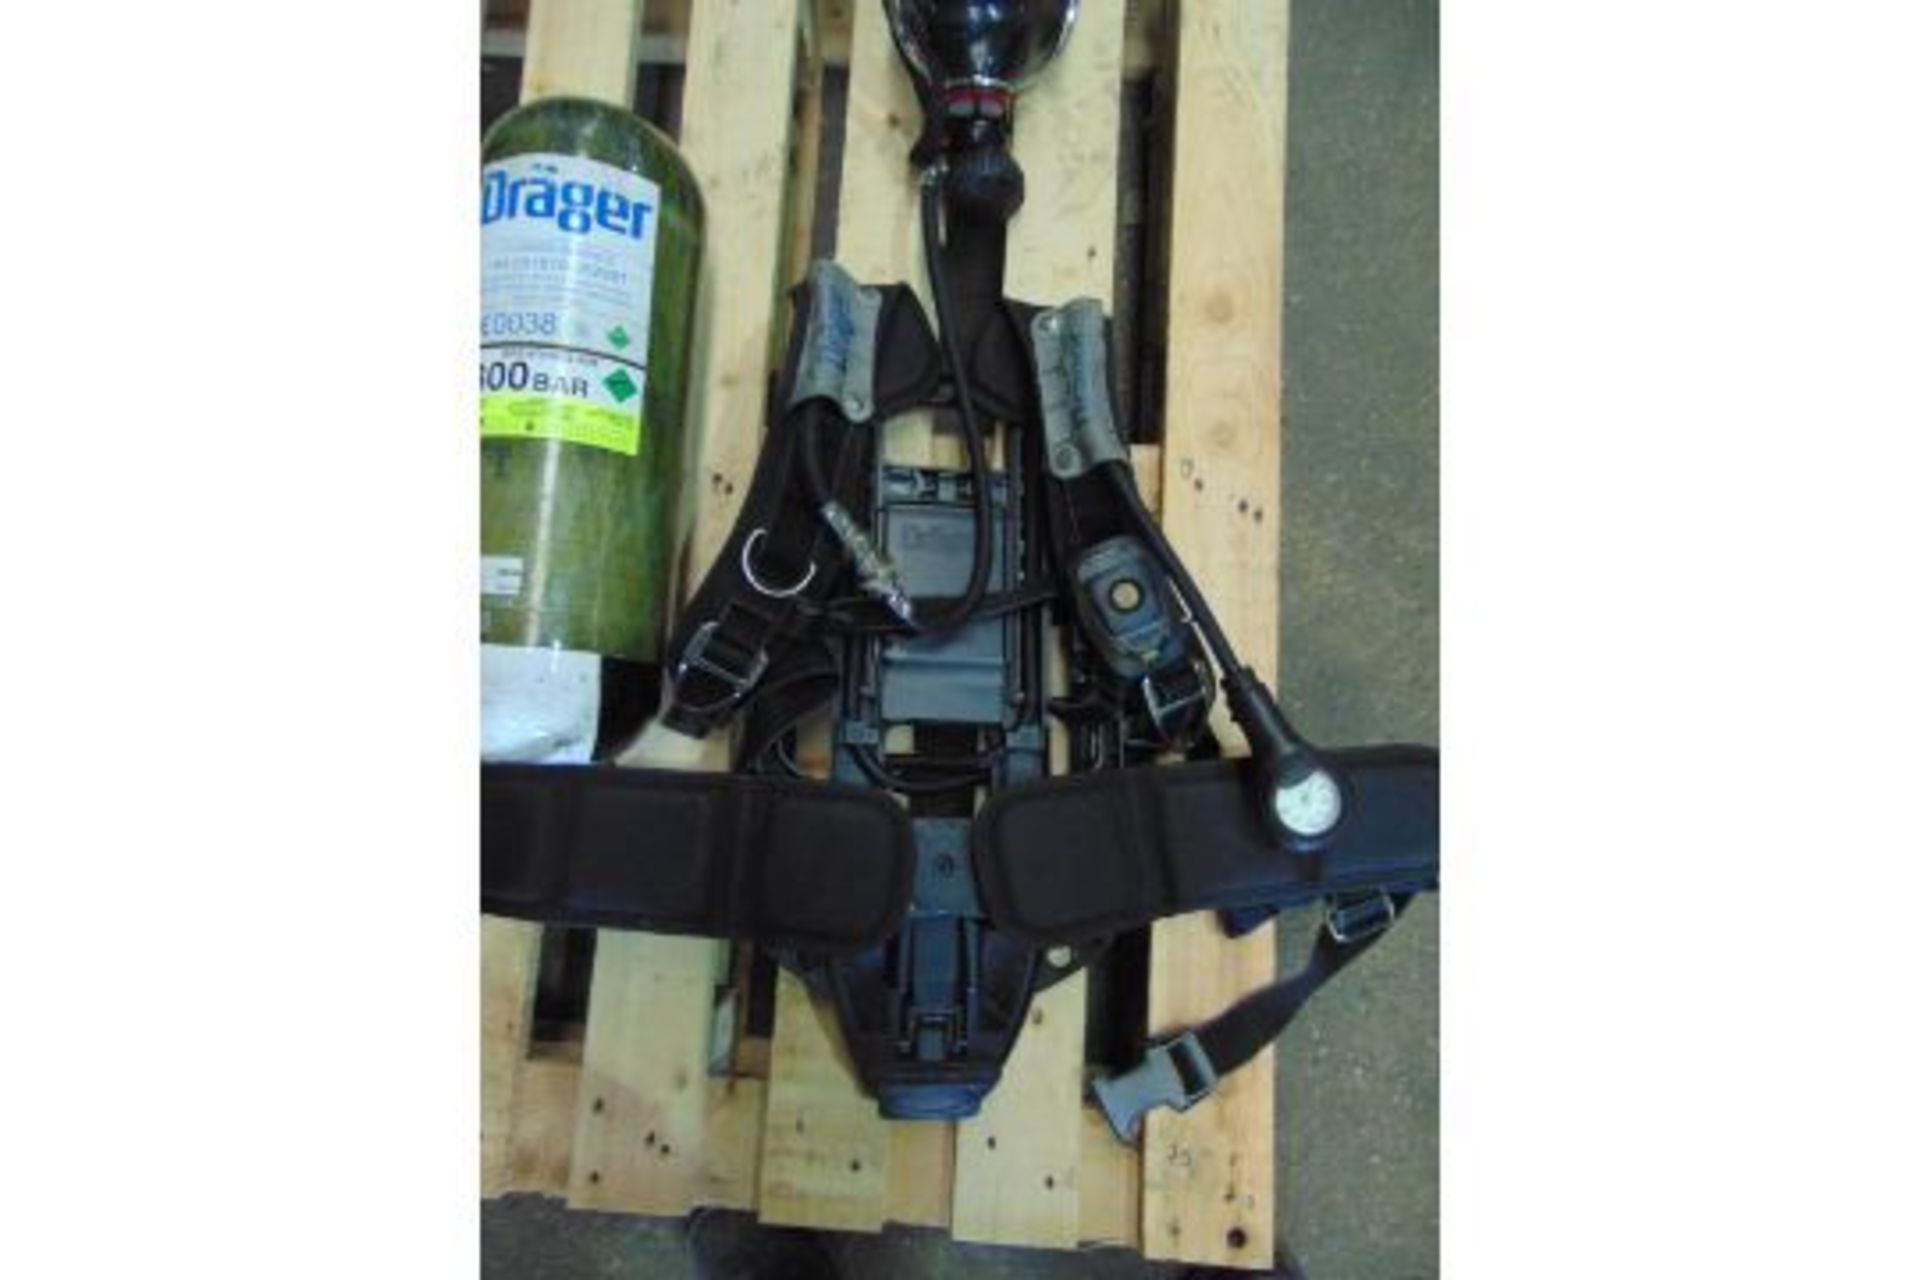 Drager PSS 7000 Self Contained Breathing Apparatus w/ 2 x Drager 300 Bar Air Cylinders - Image 10 of 22